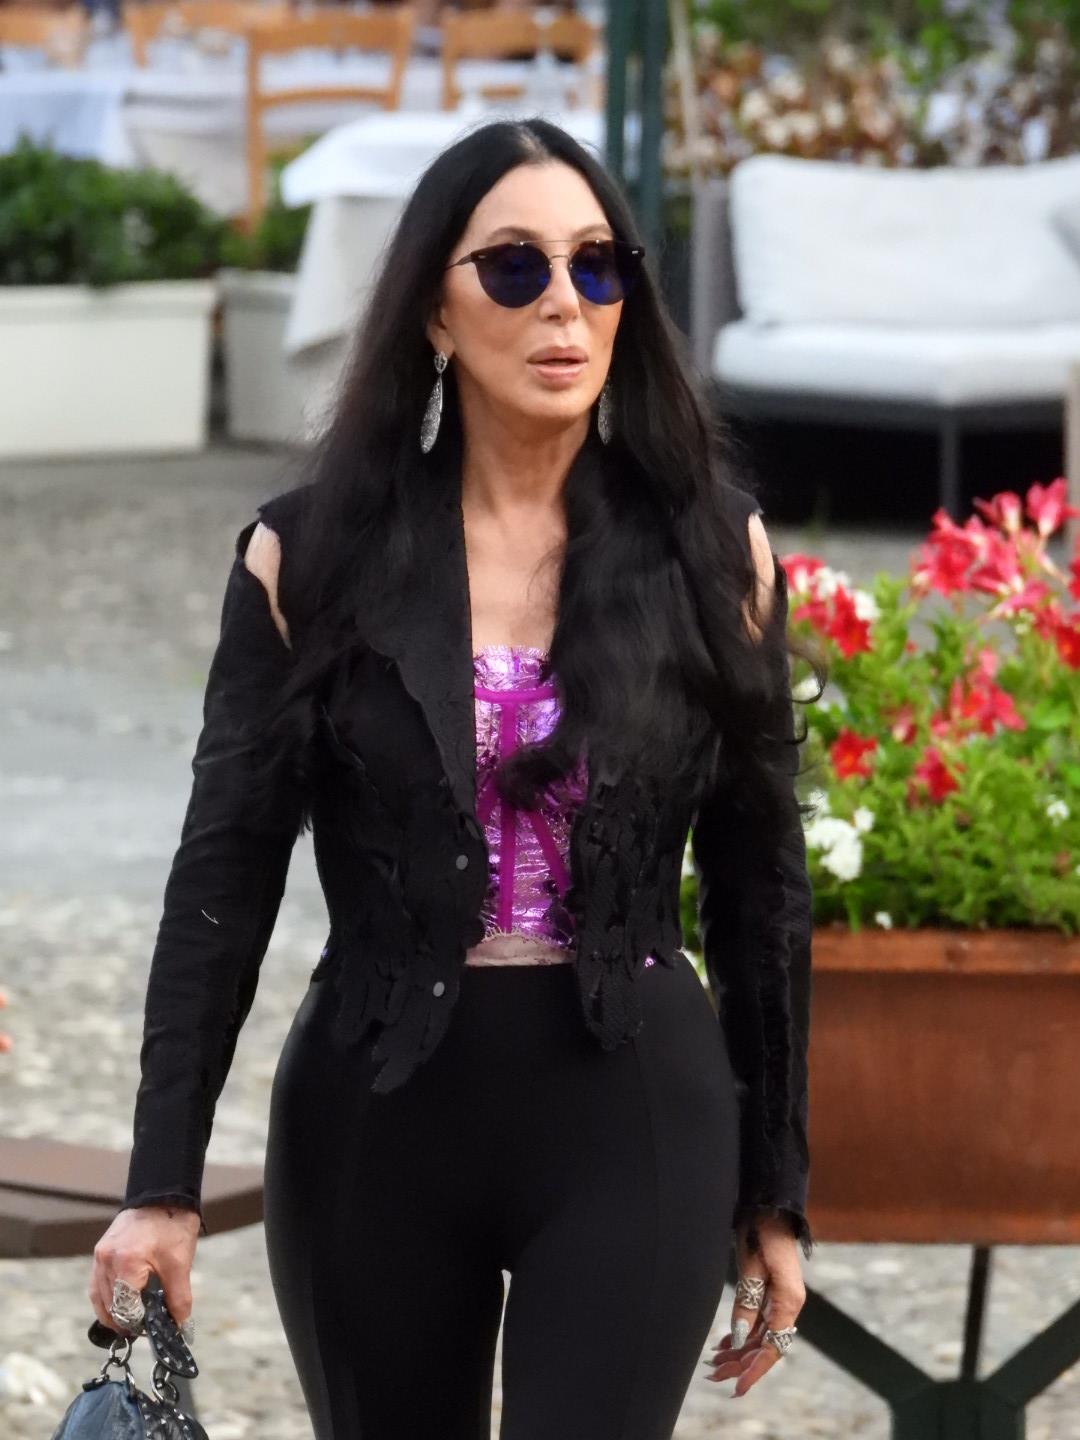 Cher is seen on July 18, 2021 in Portofino, Italy. | Source: Getty Images